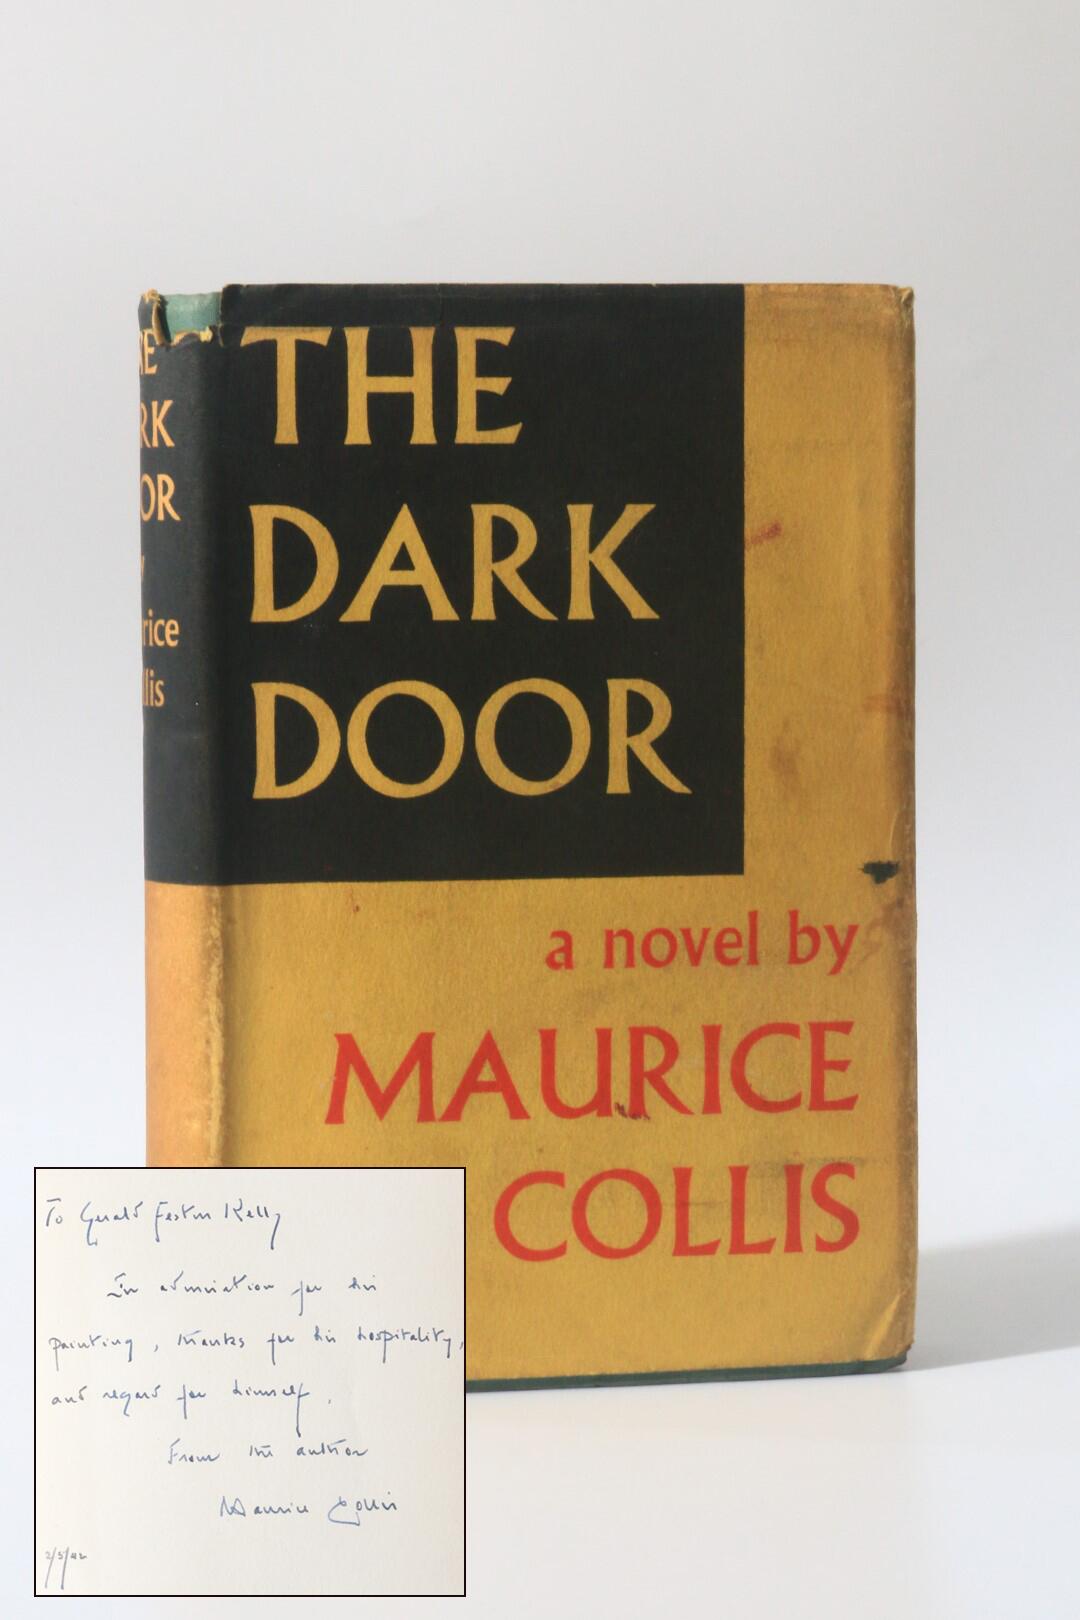 Maurice Collis - The Dark Door - Faber & Faber, 1940, Signed First Edition.